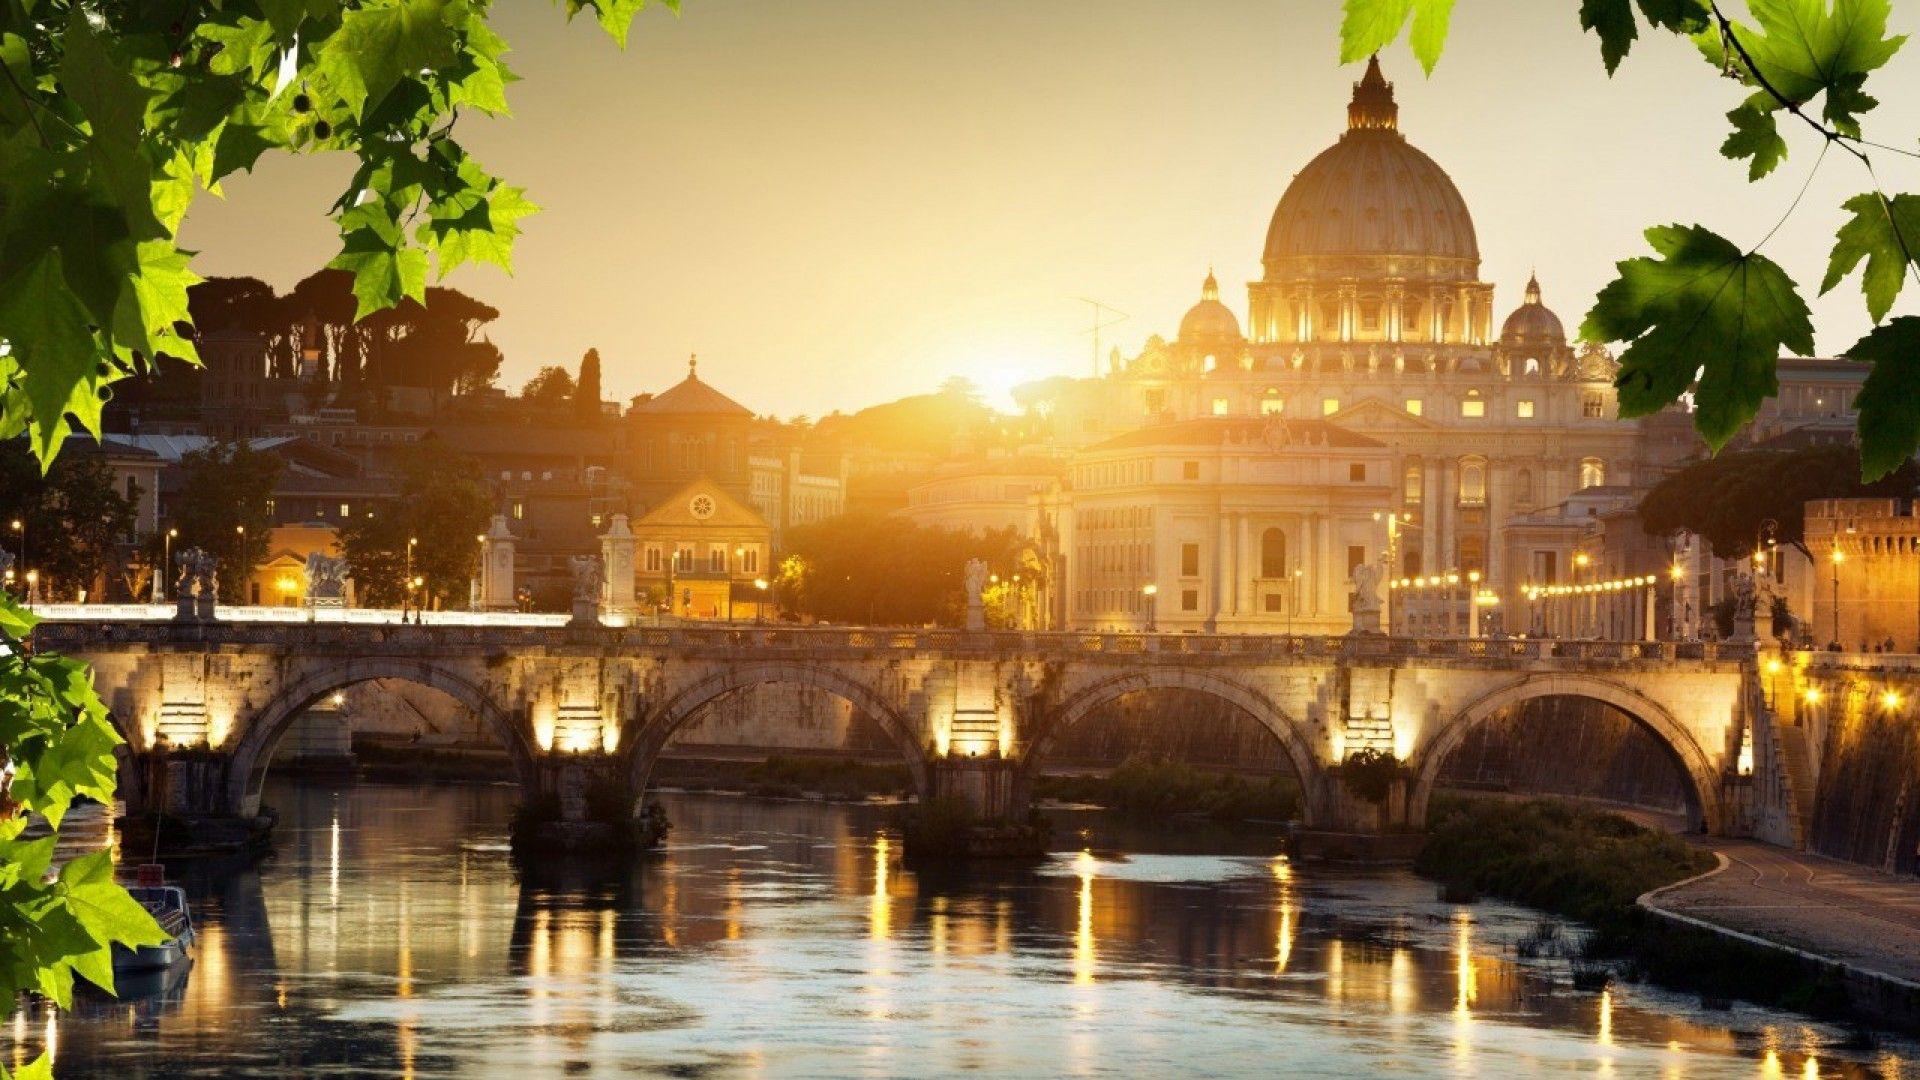 Sunset in Rome wallpaper and image, picture, photo